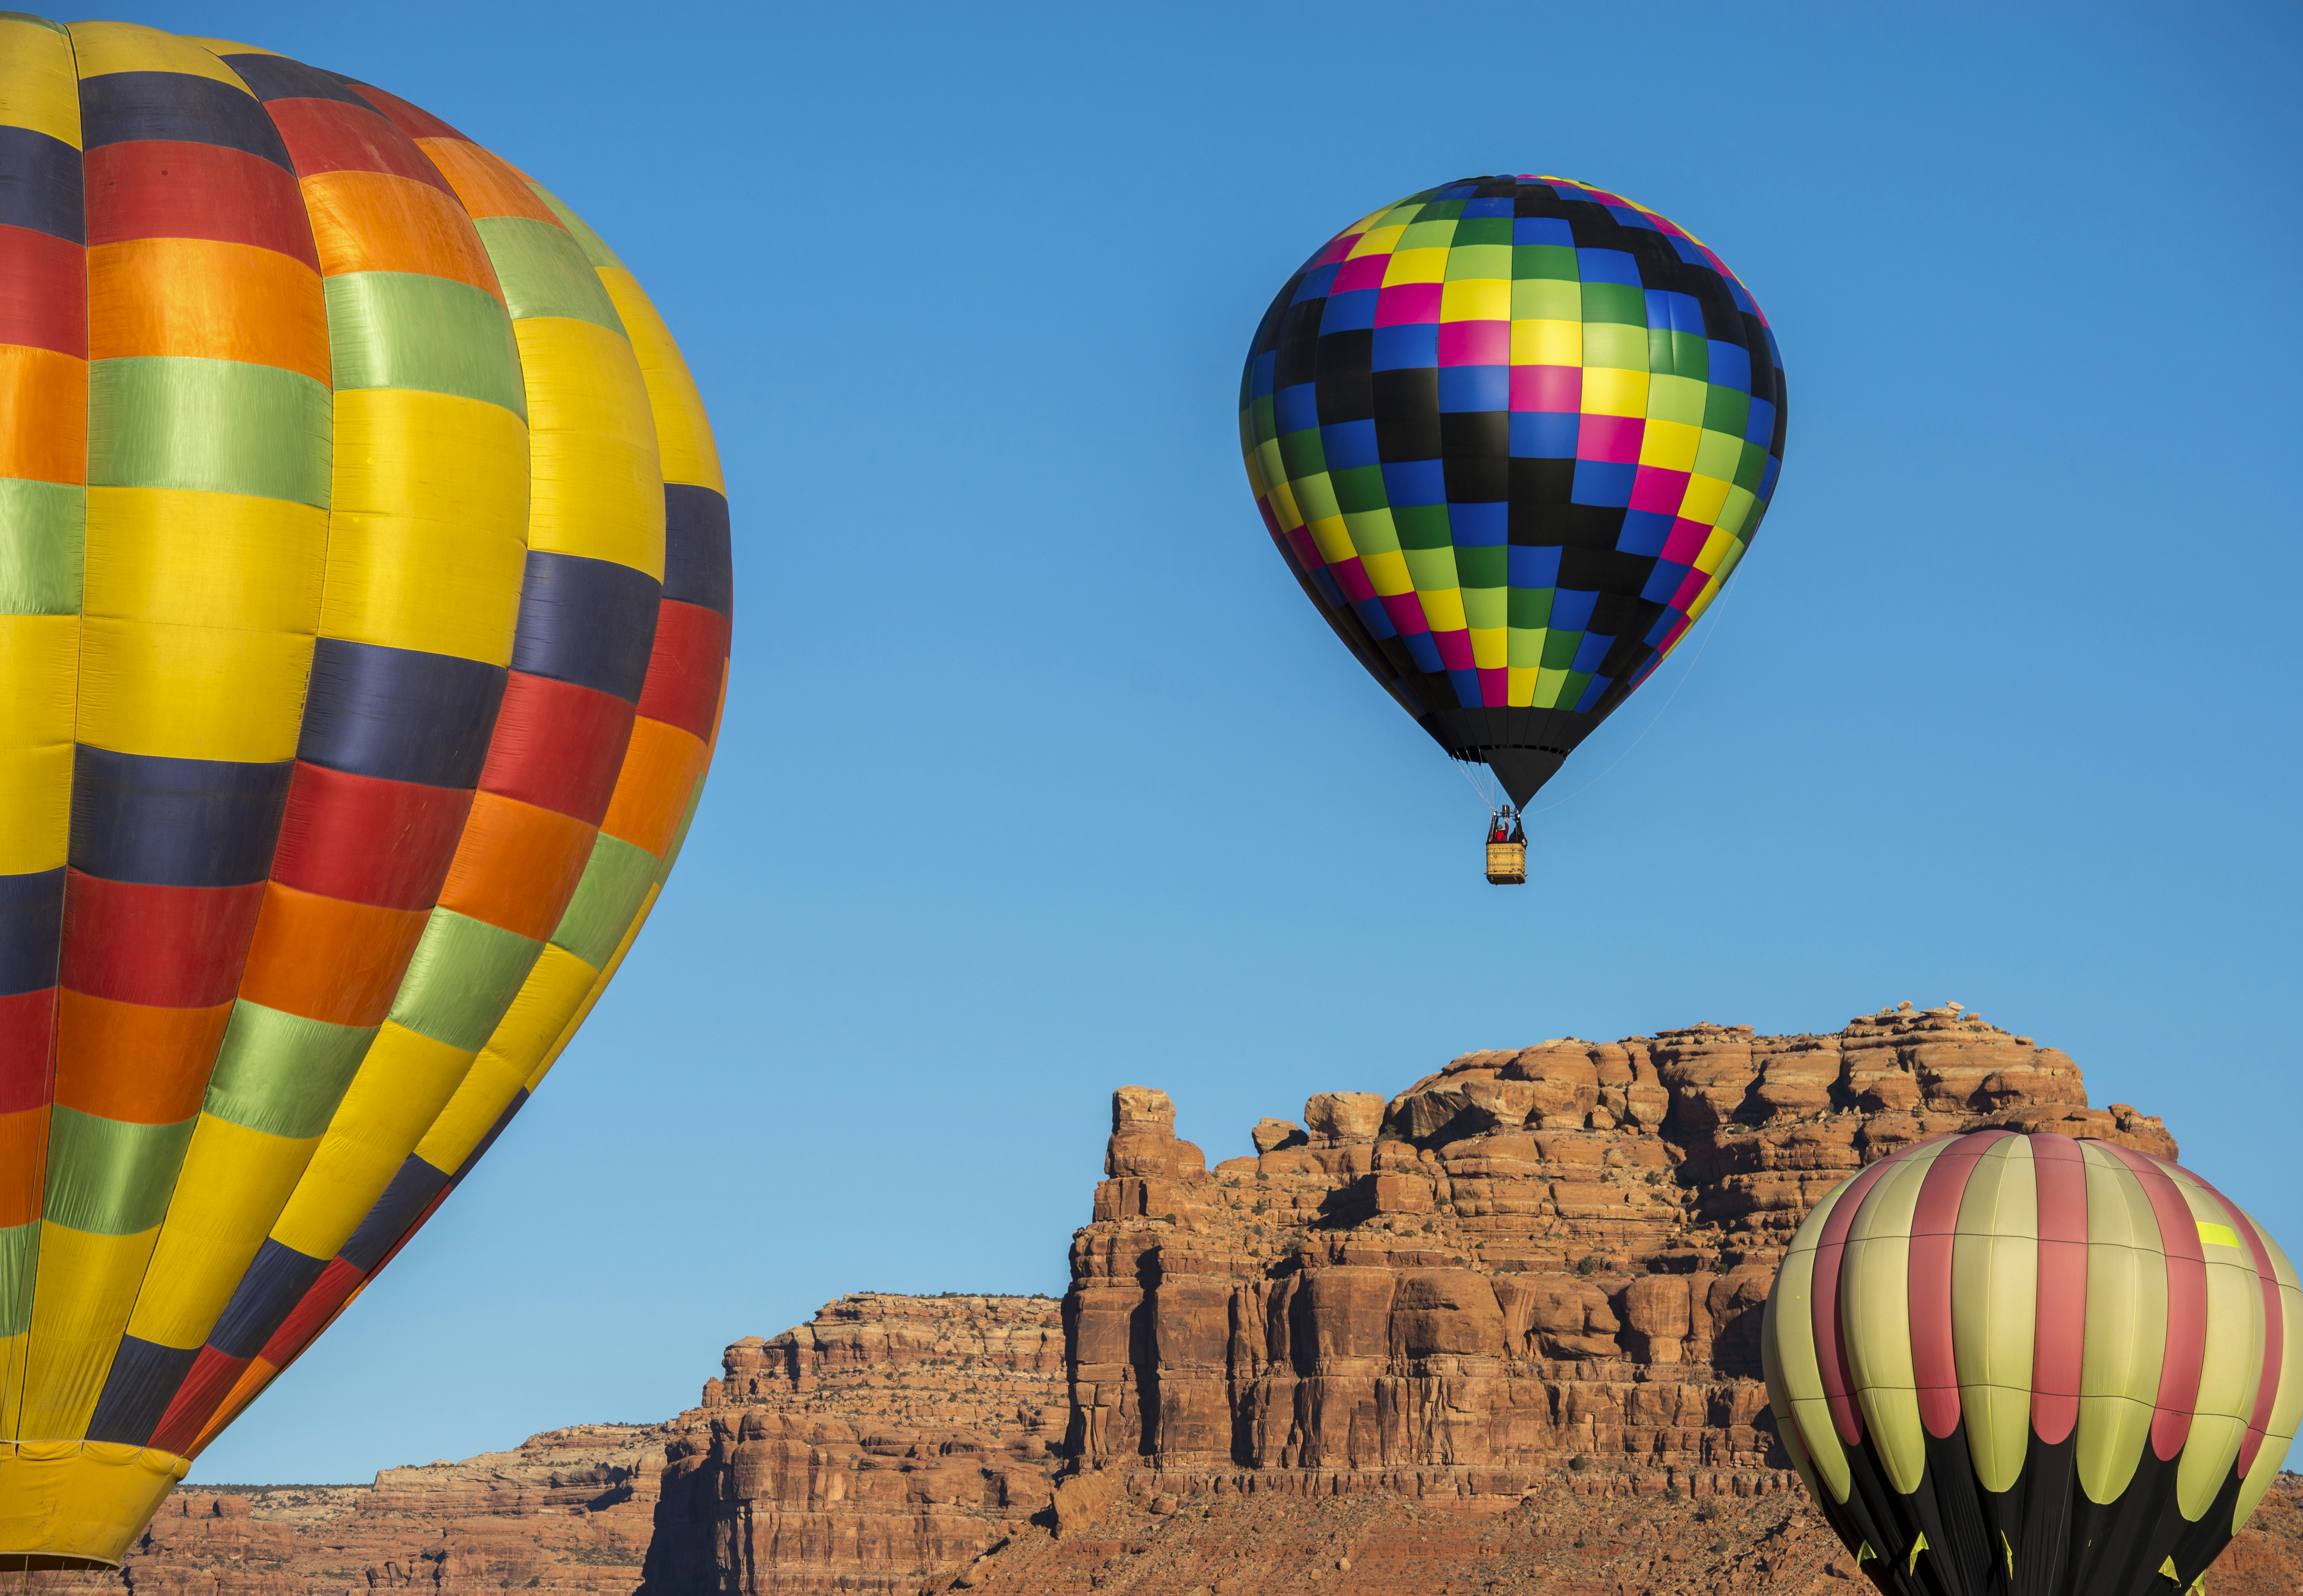 A trio of brightly colored hot air balloons soar around The Valley of the Gods during the Bluff International Balloon Festival.